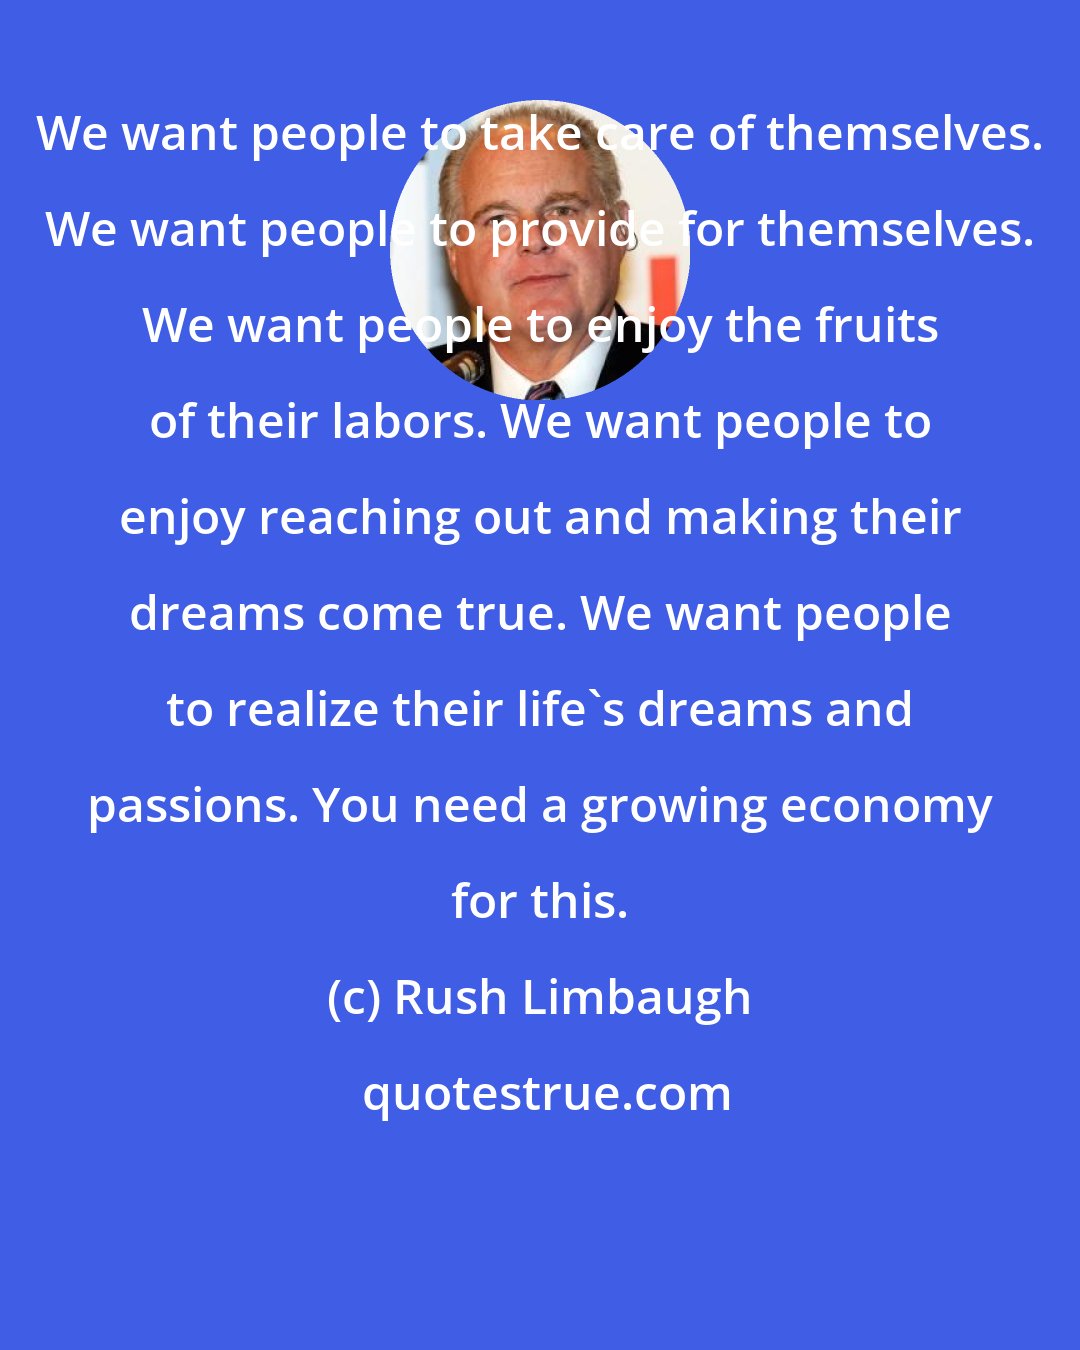 Rush Limbaugh: We want people to take care of themselves. We want people to provide for themselves. We want people to enjoy the fruits of their labors. We want people to enjoy reaching out and making their dreams come true. We want people to realize their life's dreams and passions. You need a growing economy for this.